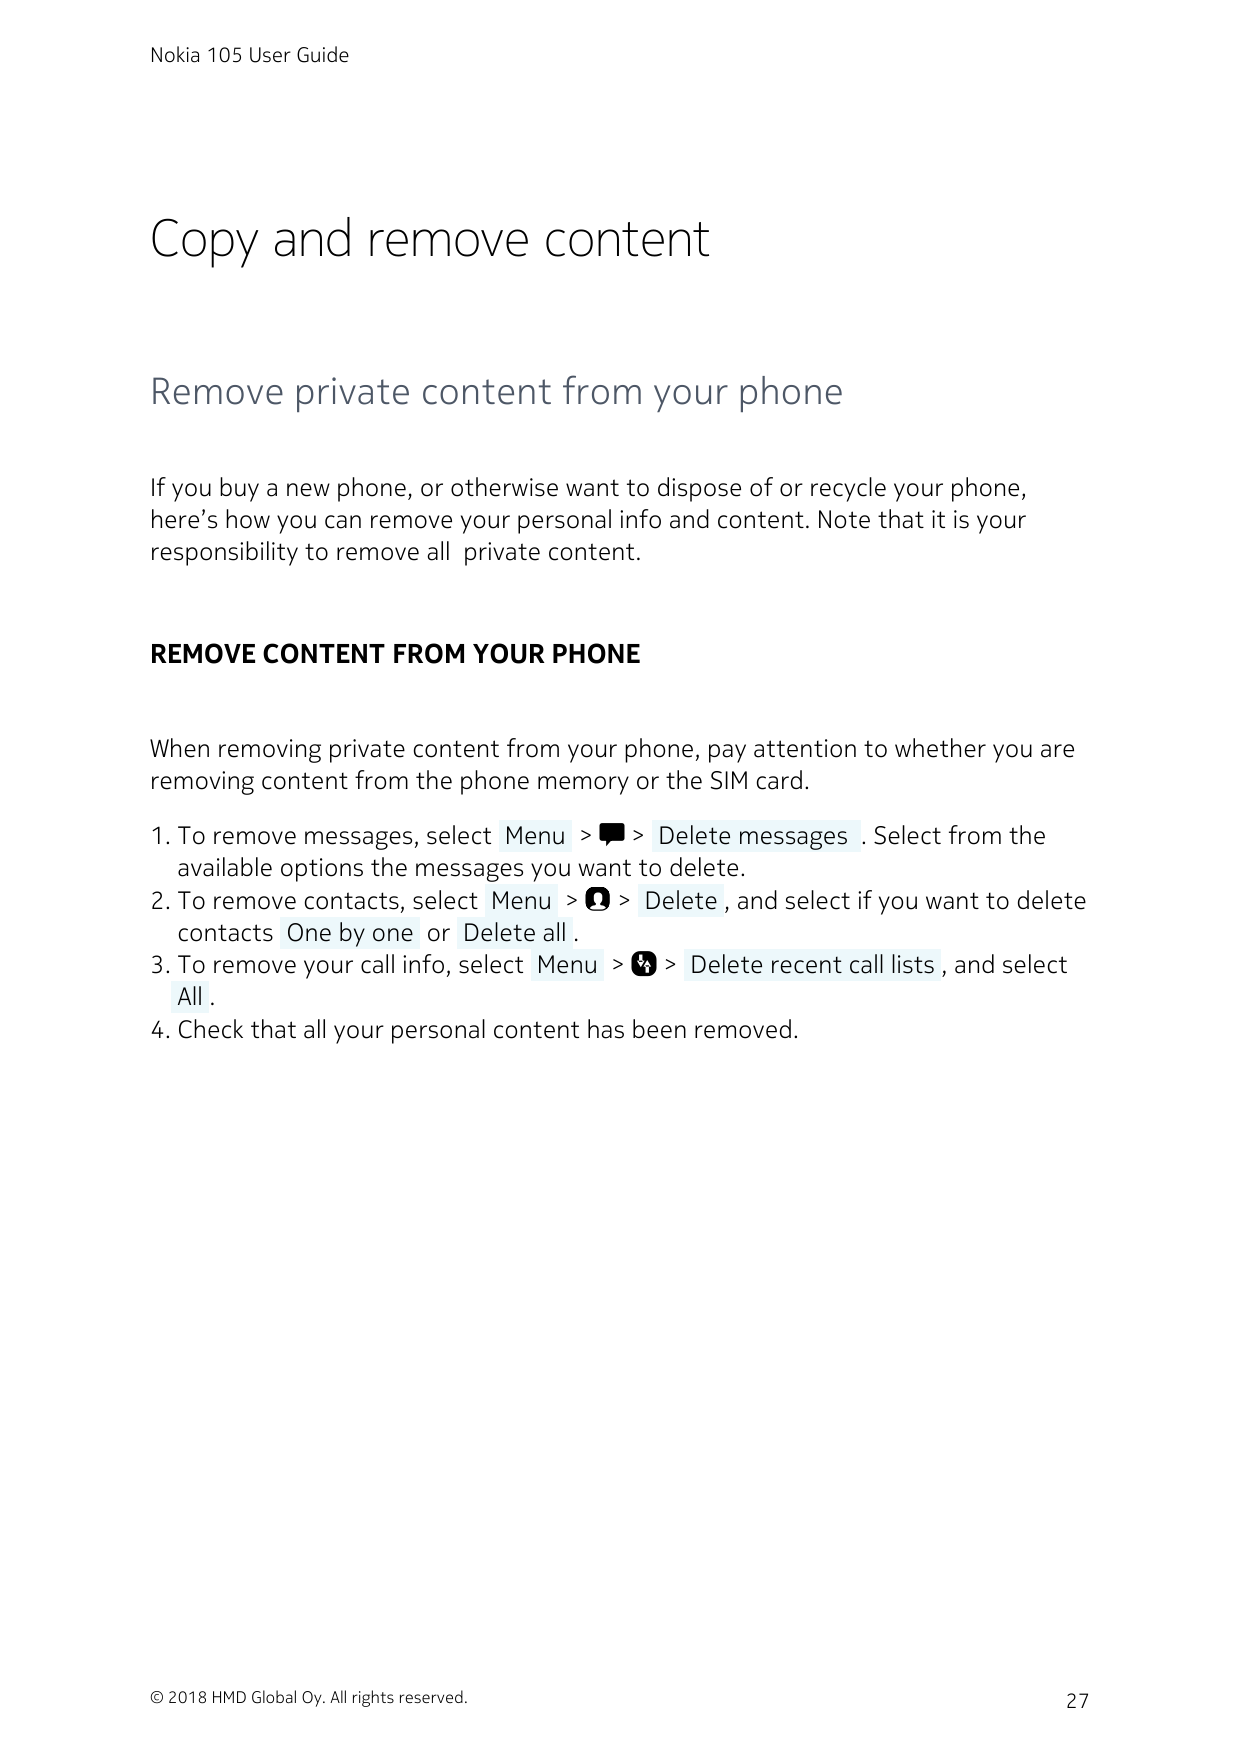 Nokia 105 User GuideCopy and remove contentRemove private content from your phoneIf you buy a new phone, or otherwise want to di